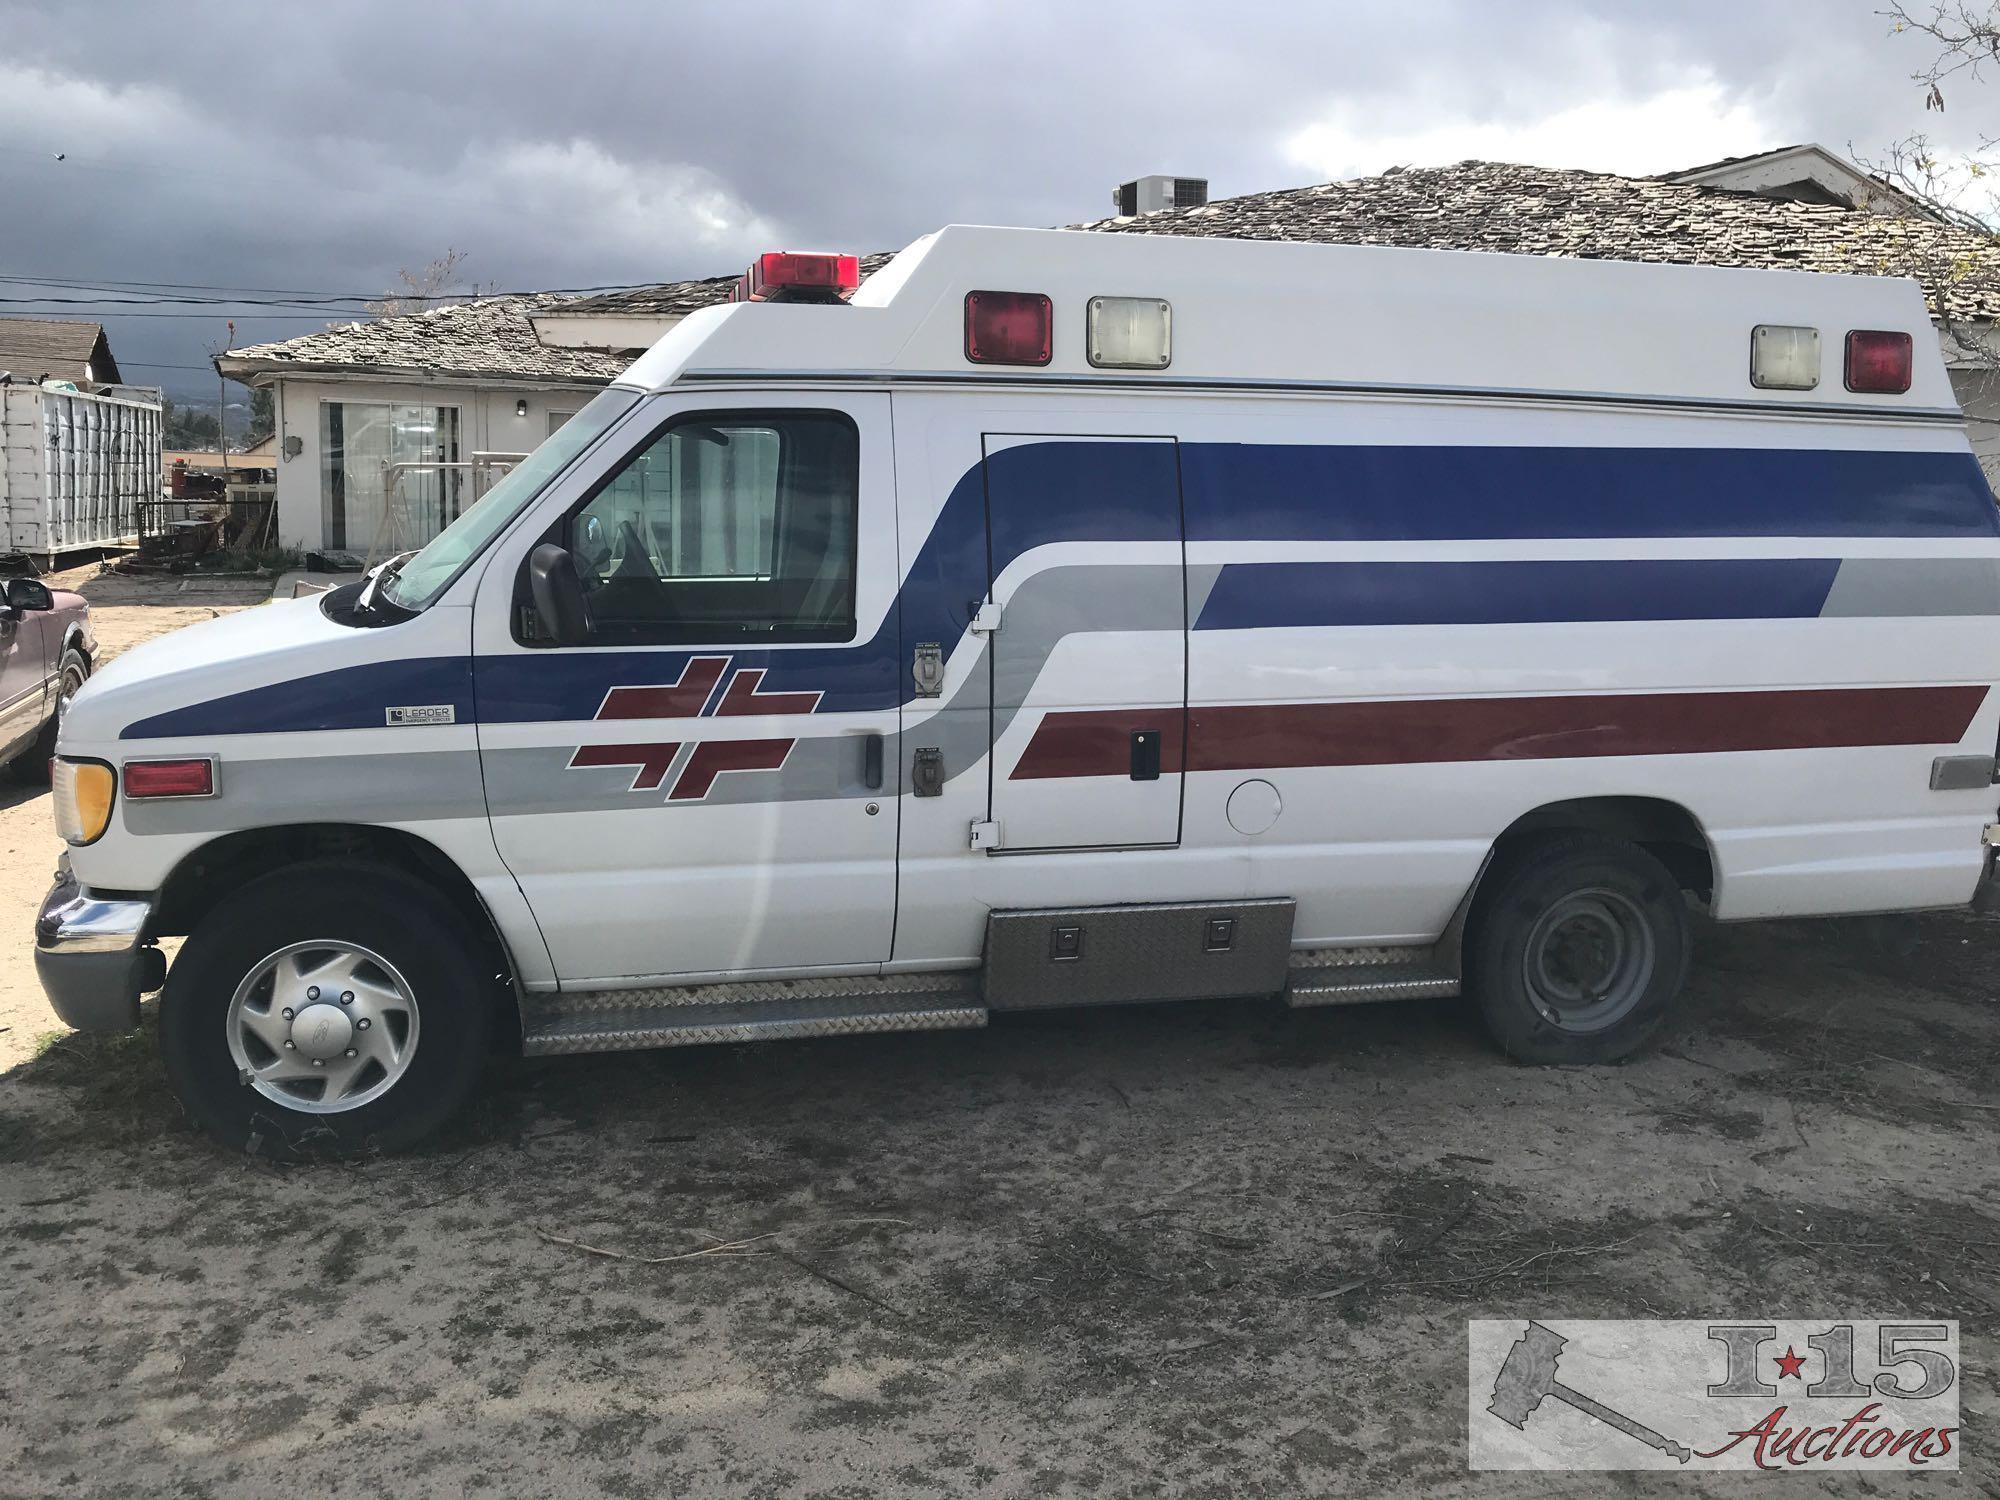 1999 Ford Econoline Ambulance Runs with Jump Start, See Video!